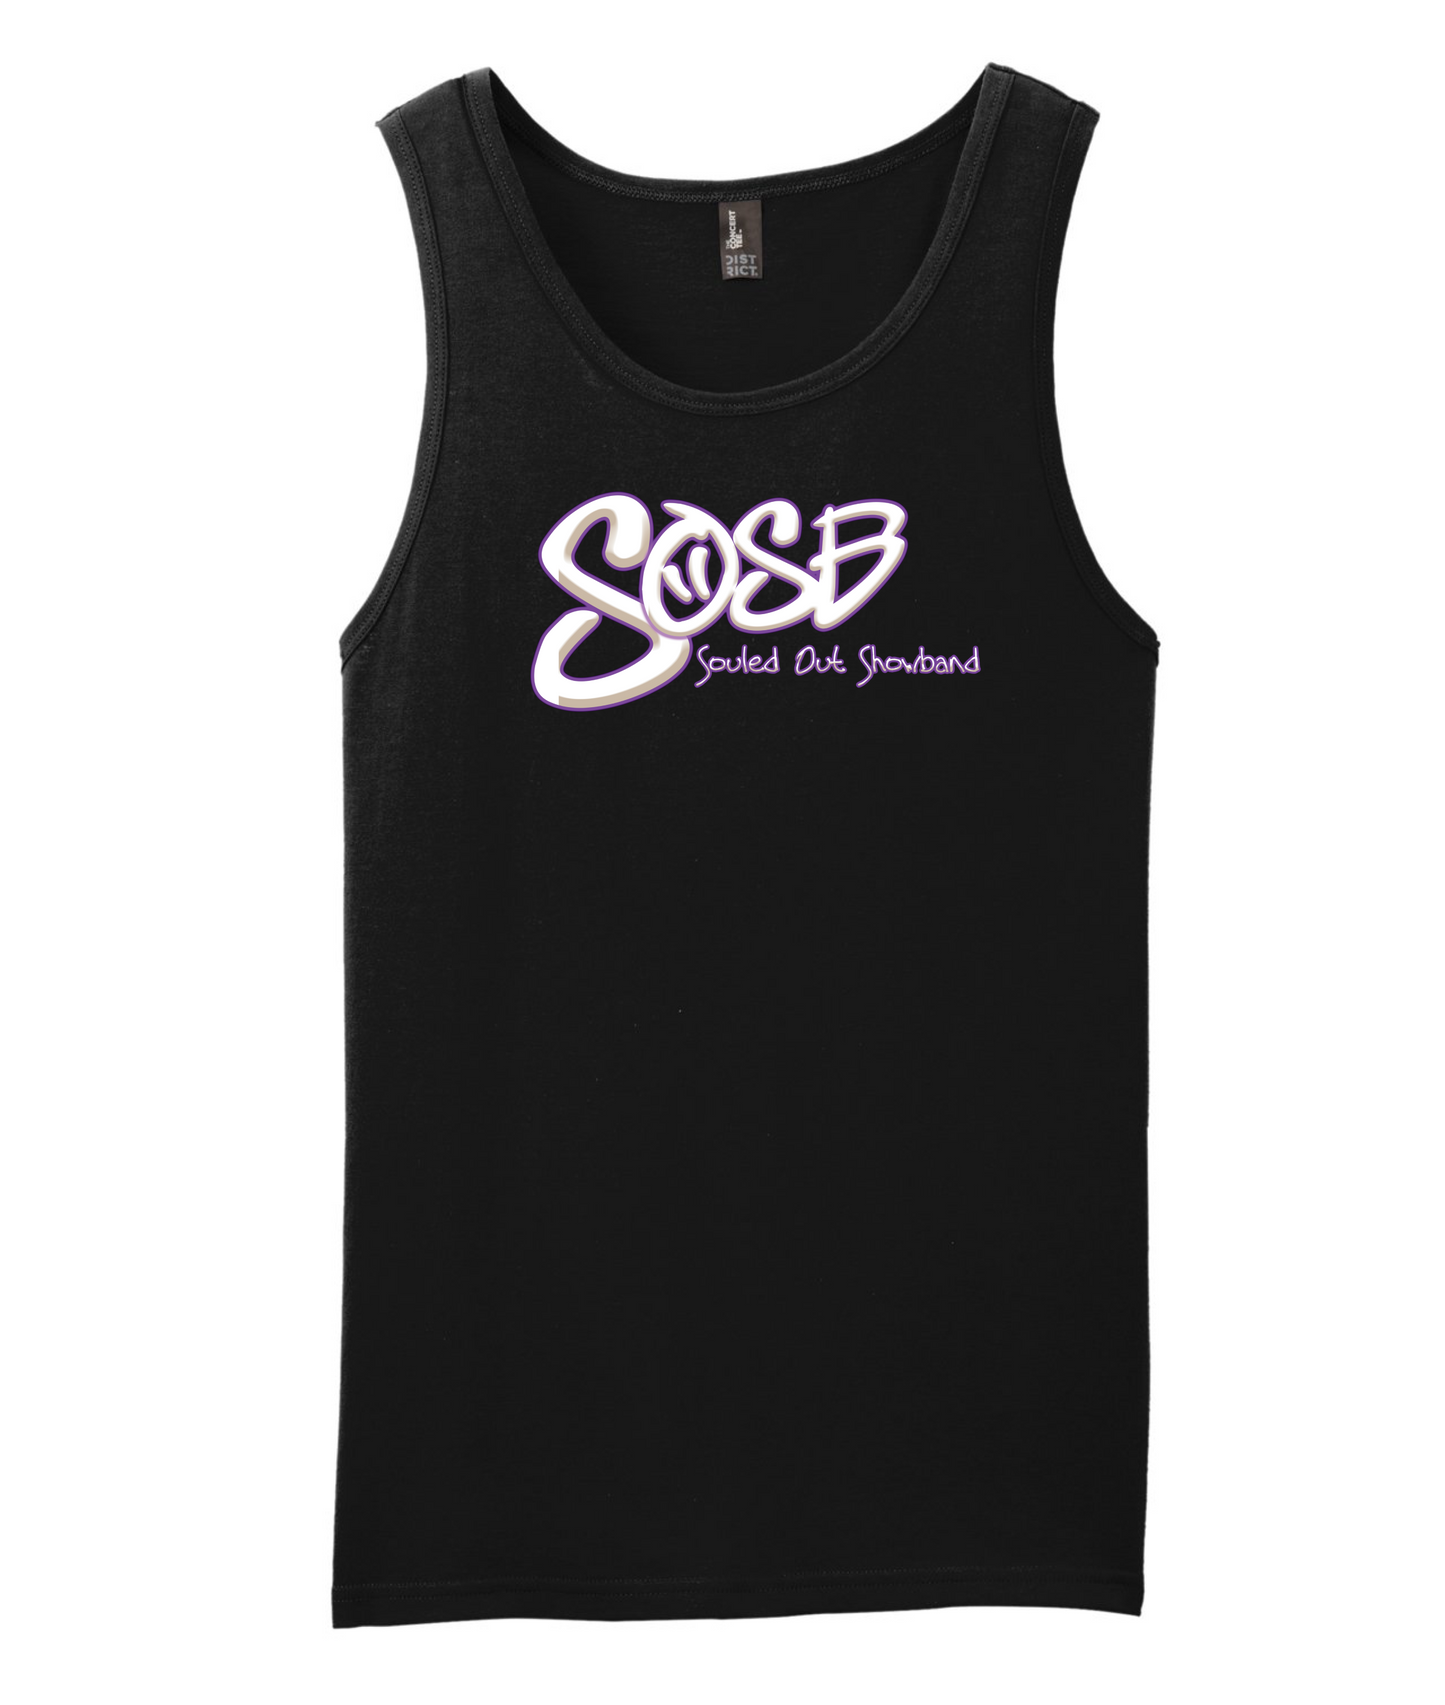 Souled Out Show Band - SOSB Lettering - Black Tank Top